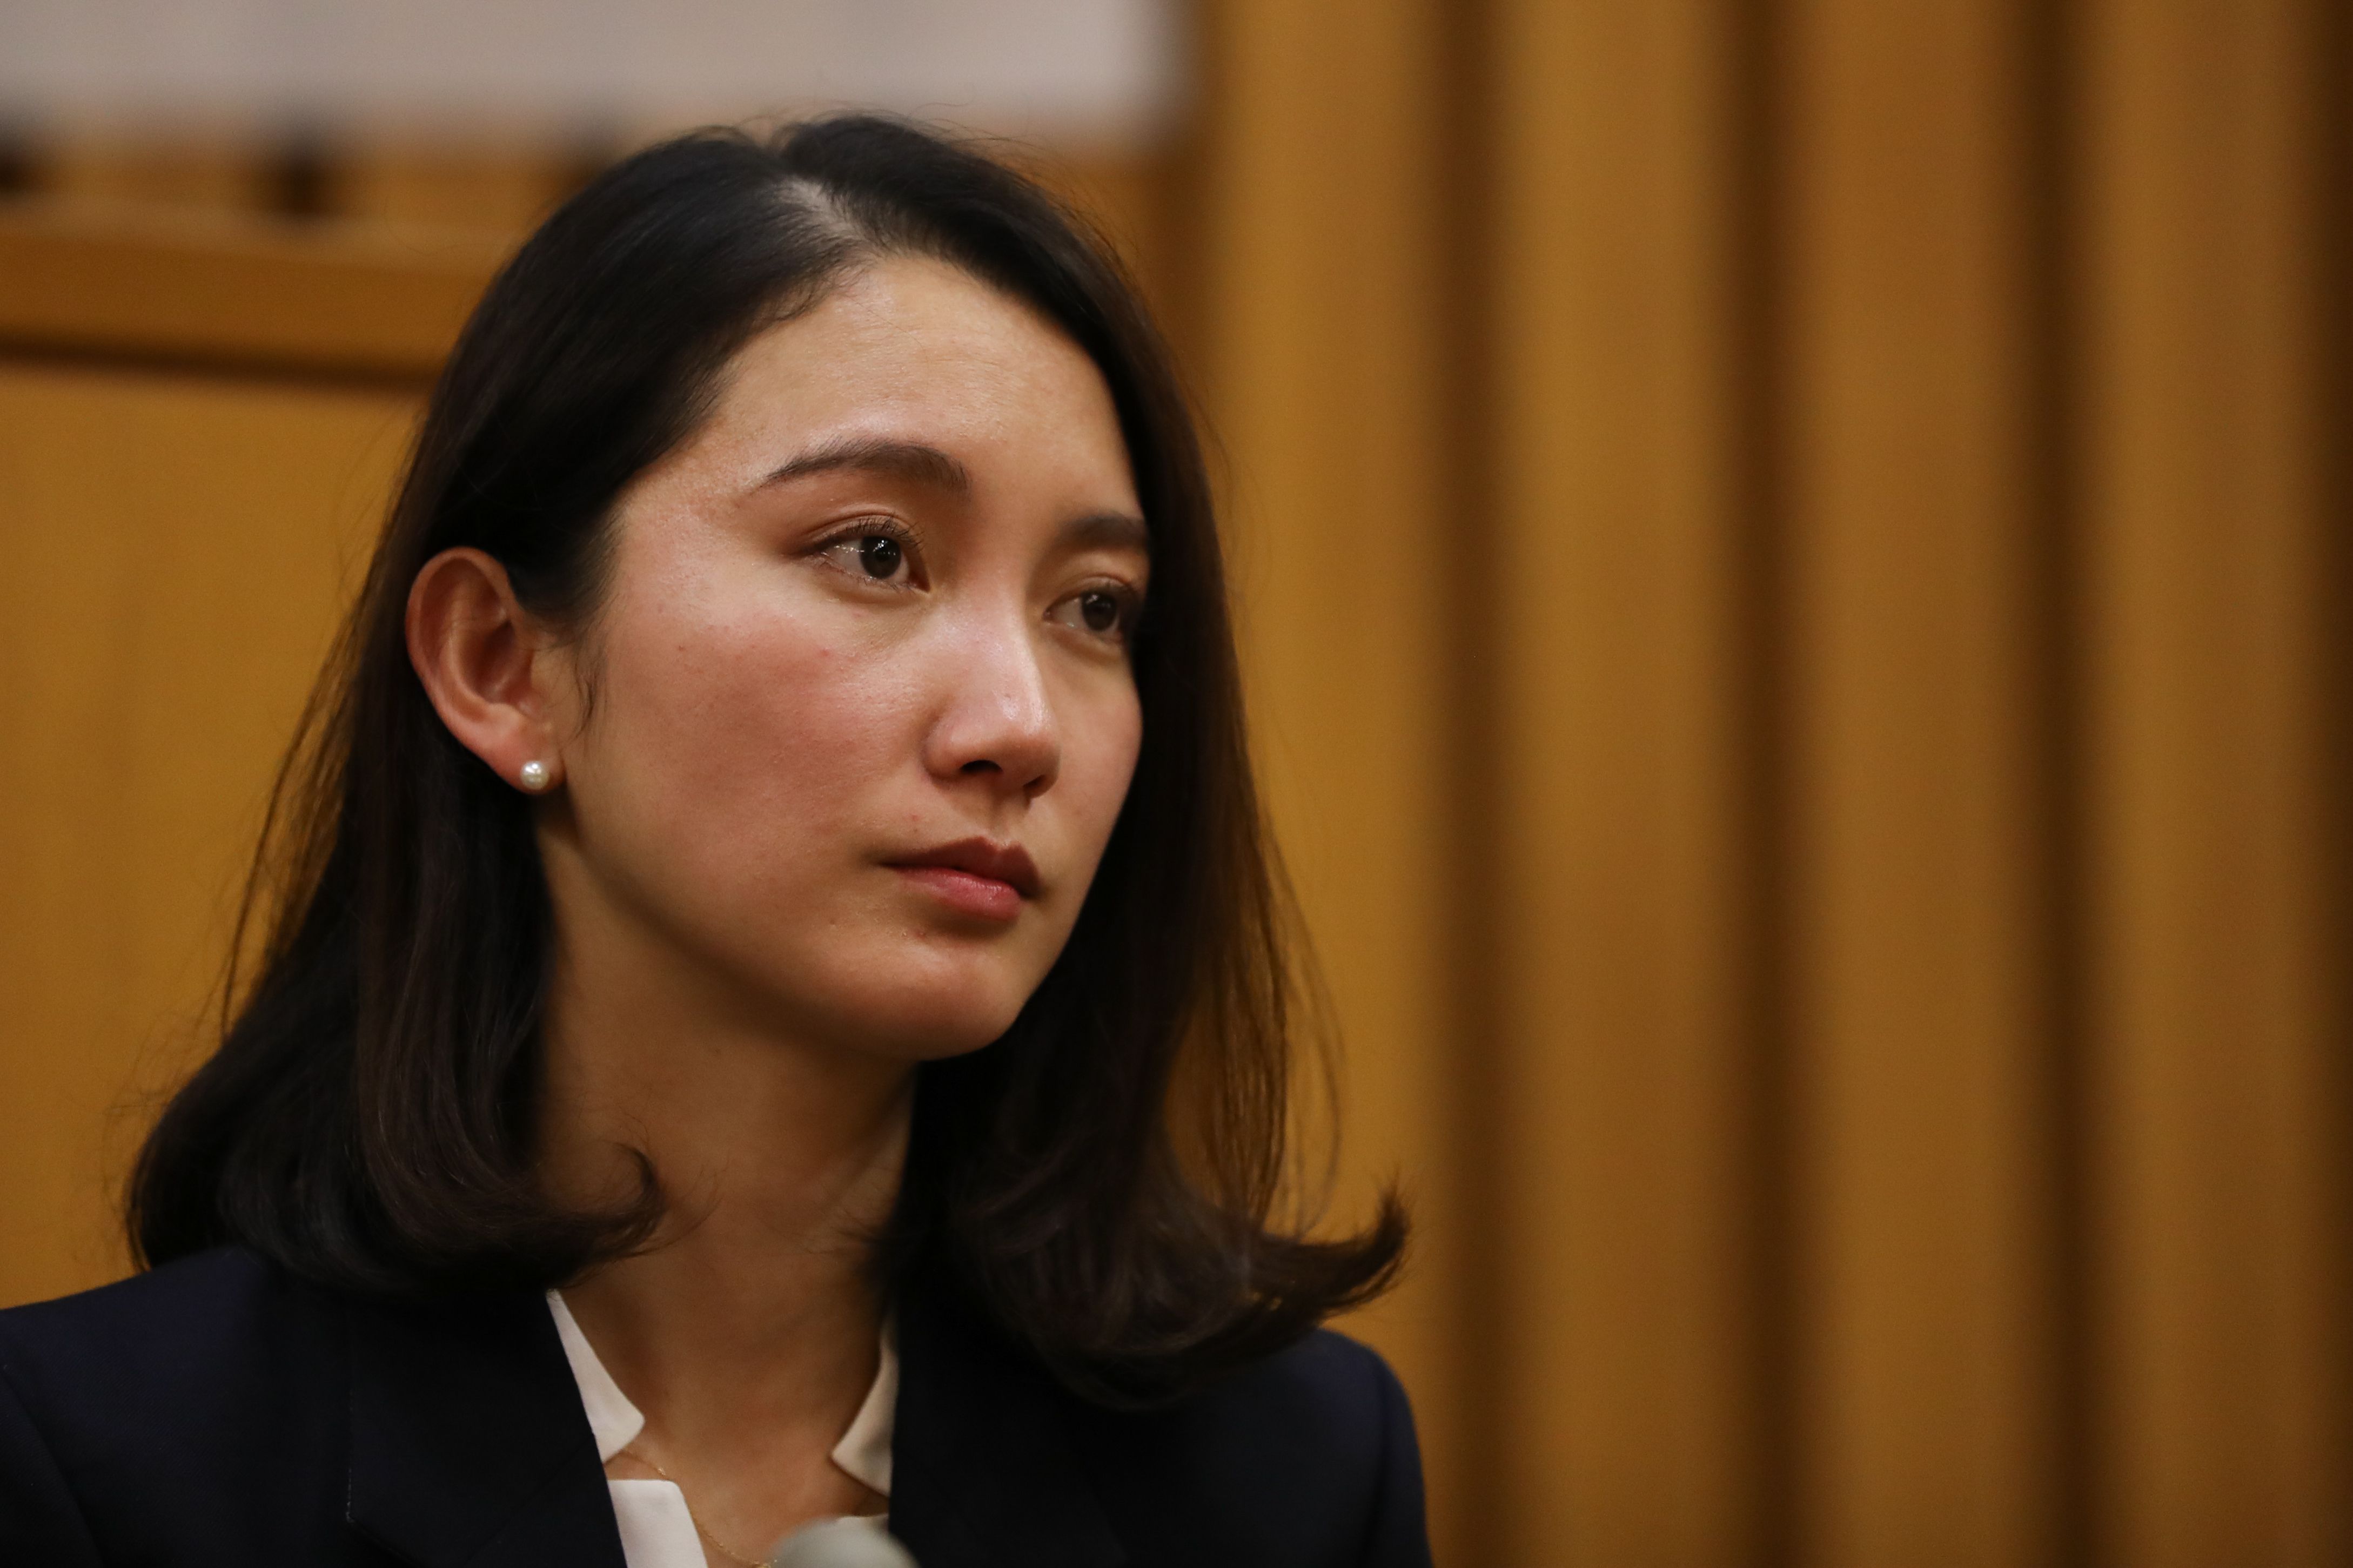 Japanese Bus Reap Sex Videos - Shiori Ito won civil case against her alleged rapist. But Japan's rape laws  need overhaul, campaigners say | CNN